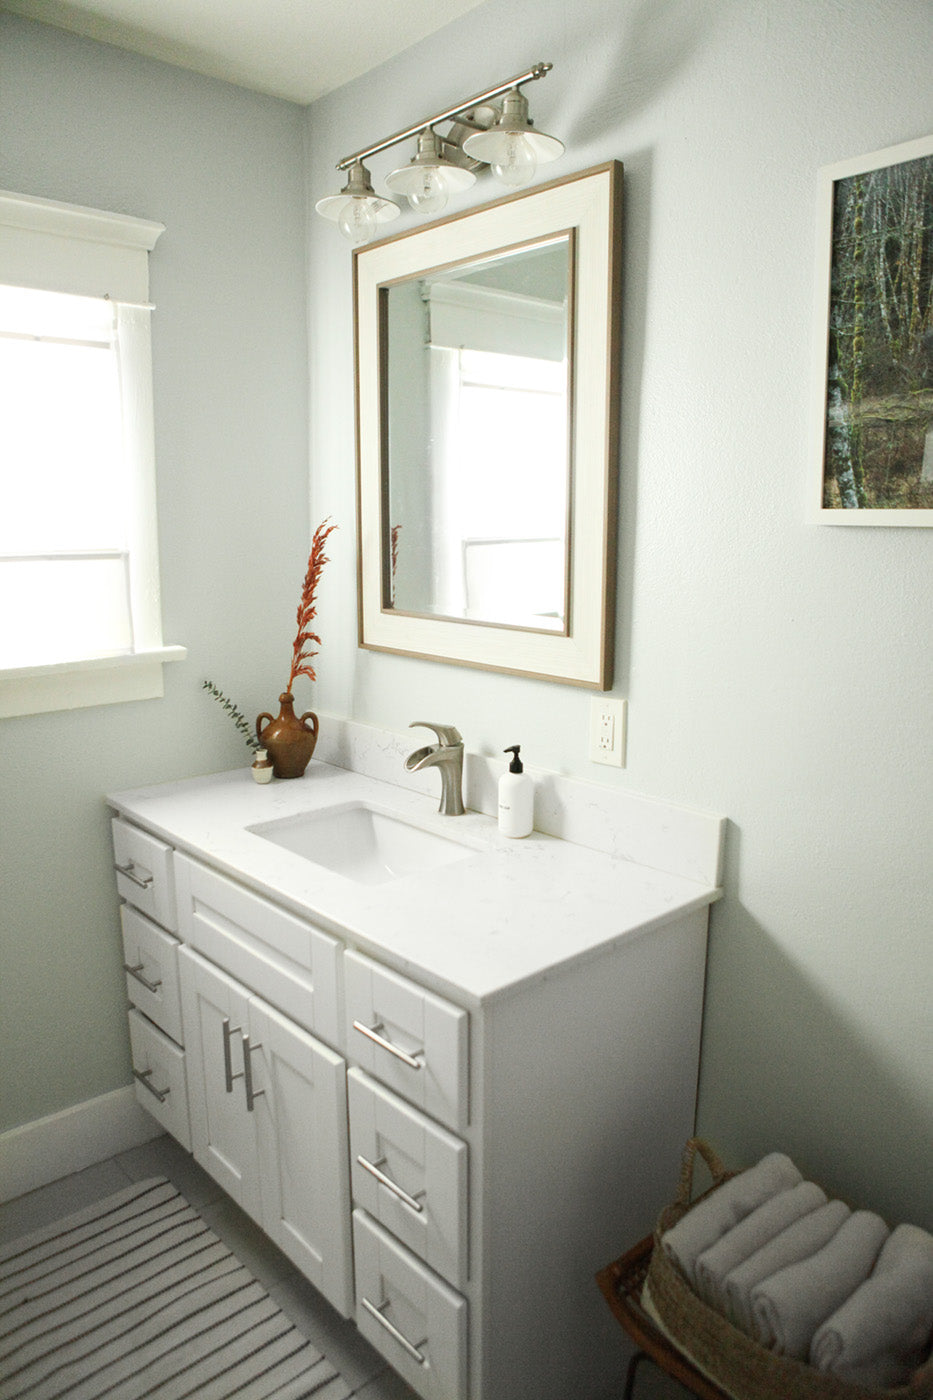 Easy Ideas For Decorating a Gray Bathroom | Clare